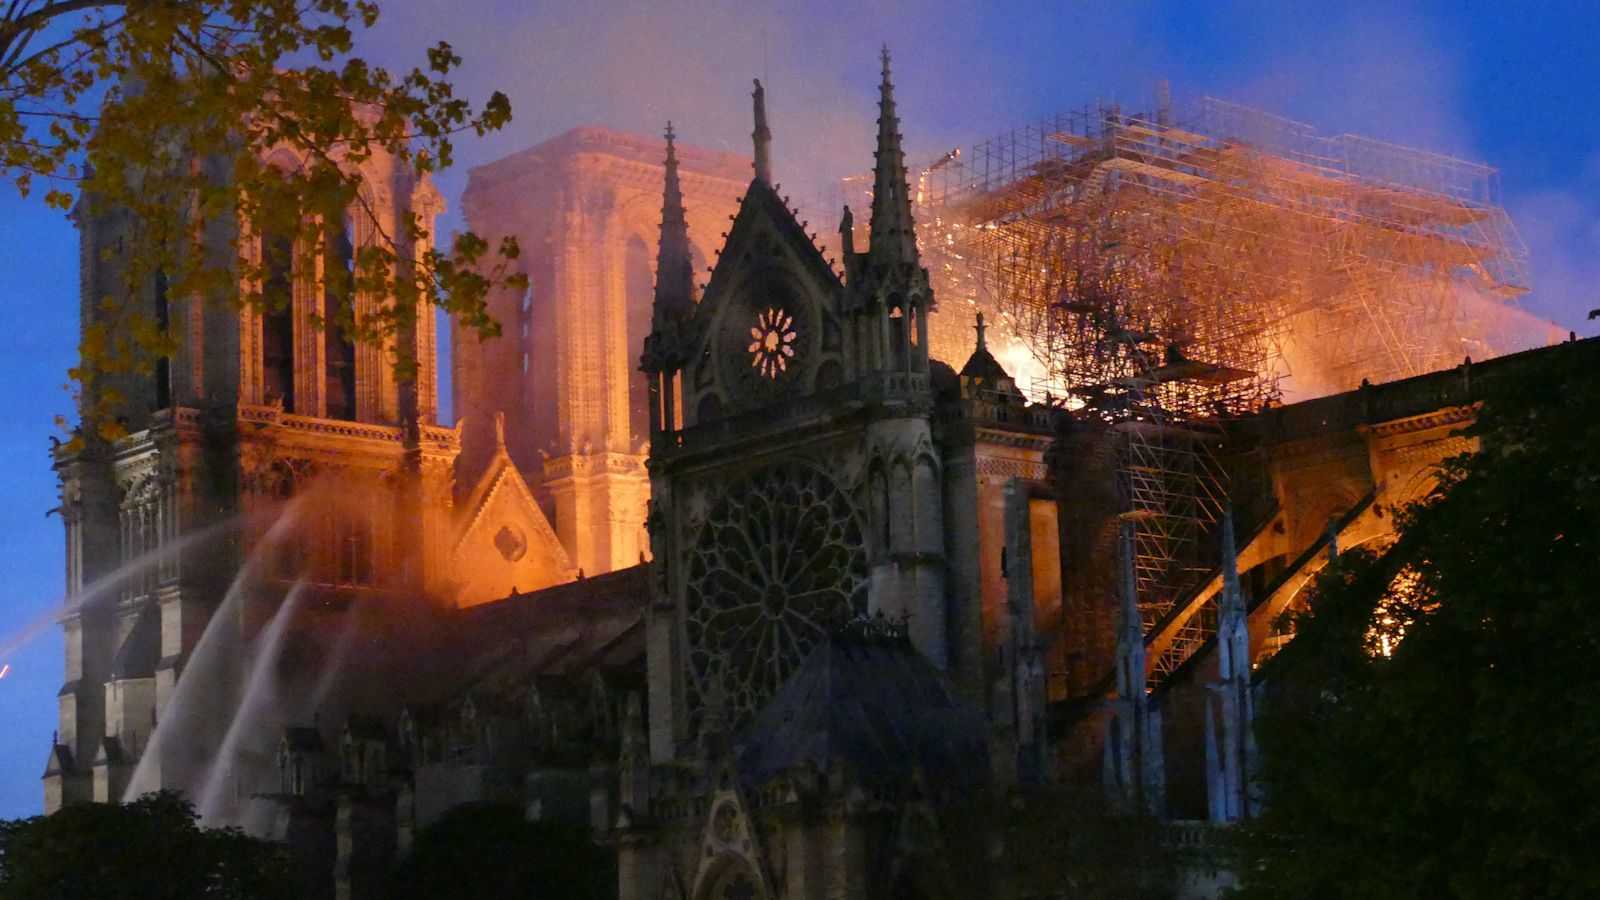 Smoke and flames rise from Notre-Dame Cathedral on April 15, 2019 in Paris, France. A fire broke out on Monday afternoon and quickly spread across the building, collapsing the spire. The cause is yet unknown but officials said it was possibly linked to ongoing renovation work.//HOUPLINERENARD_08180001/1904160824/Credit:HOUPLINE RENARD/SIPA/1904160825